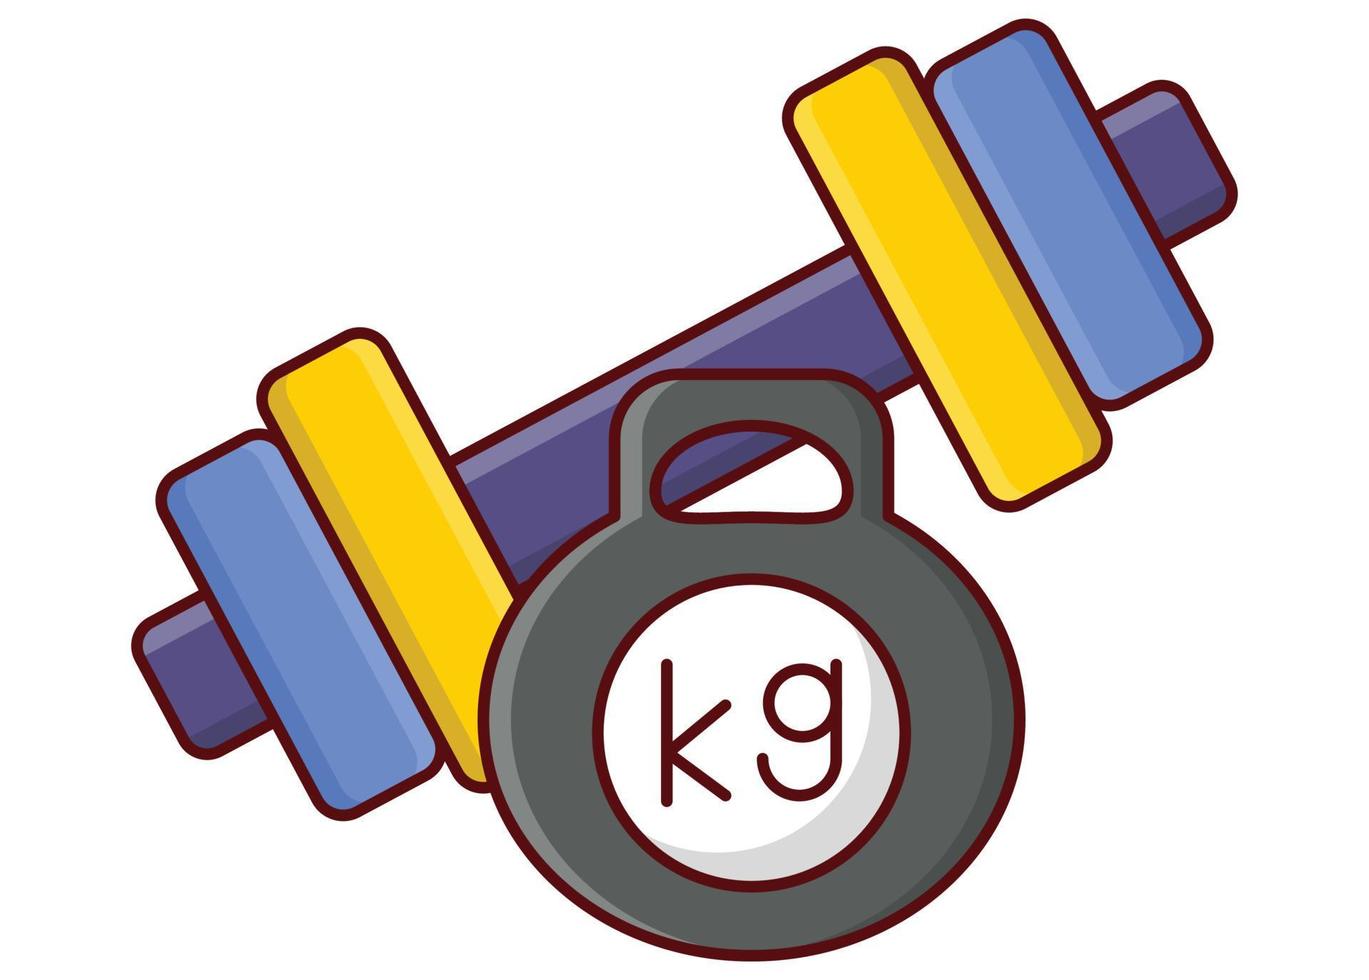 dumbbell kg vector illustration on a background.Premium quality symbols. vector icons for concept and graphic design.